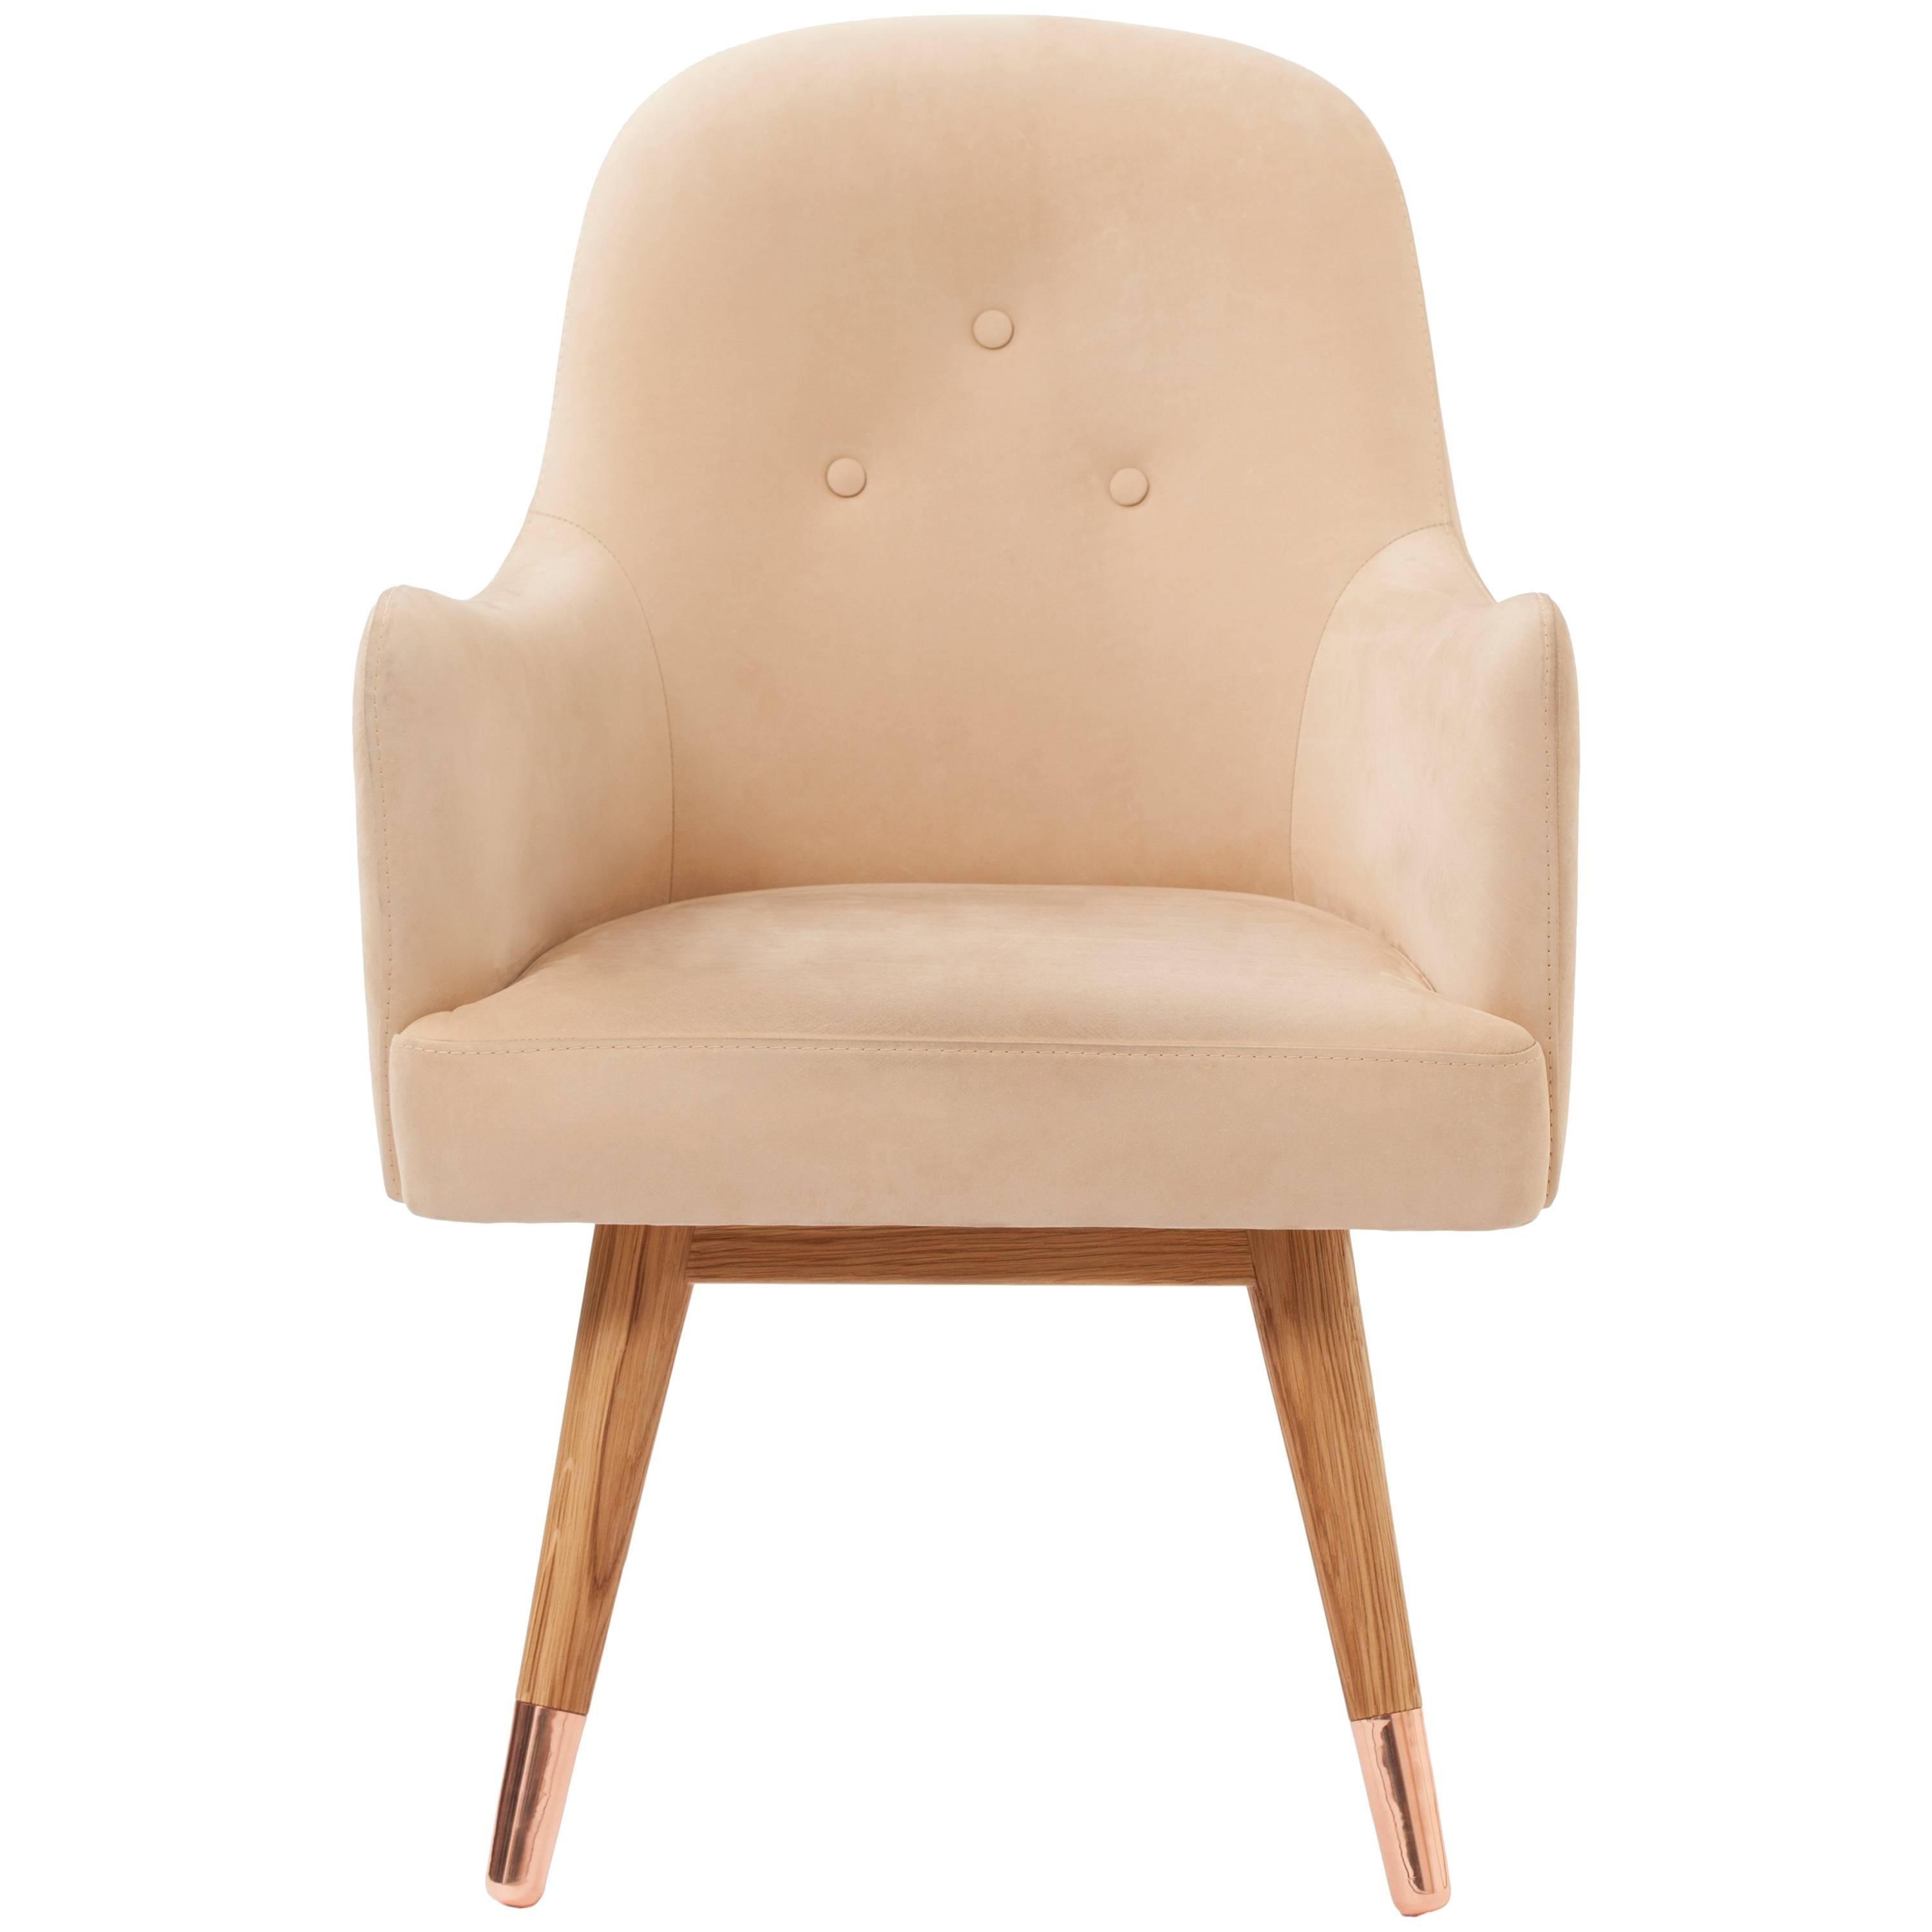 Dandy Chair Armchair in Soft Suede Beige Leather, White Oak and Copper For Sale